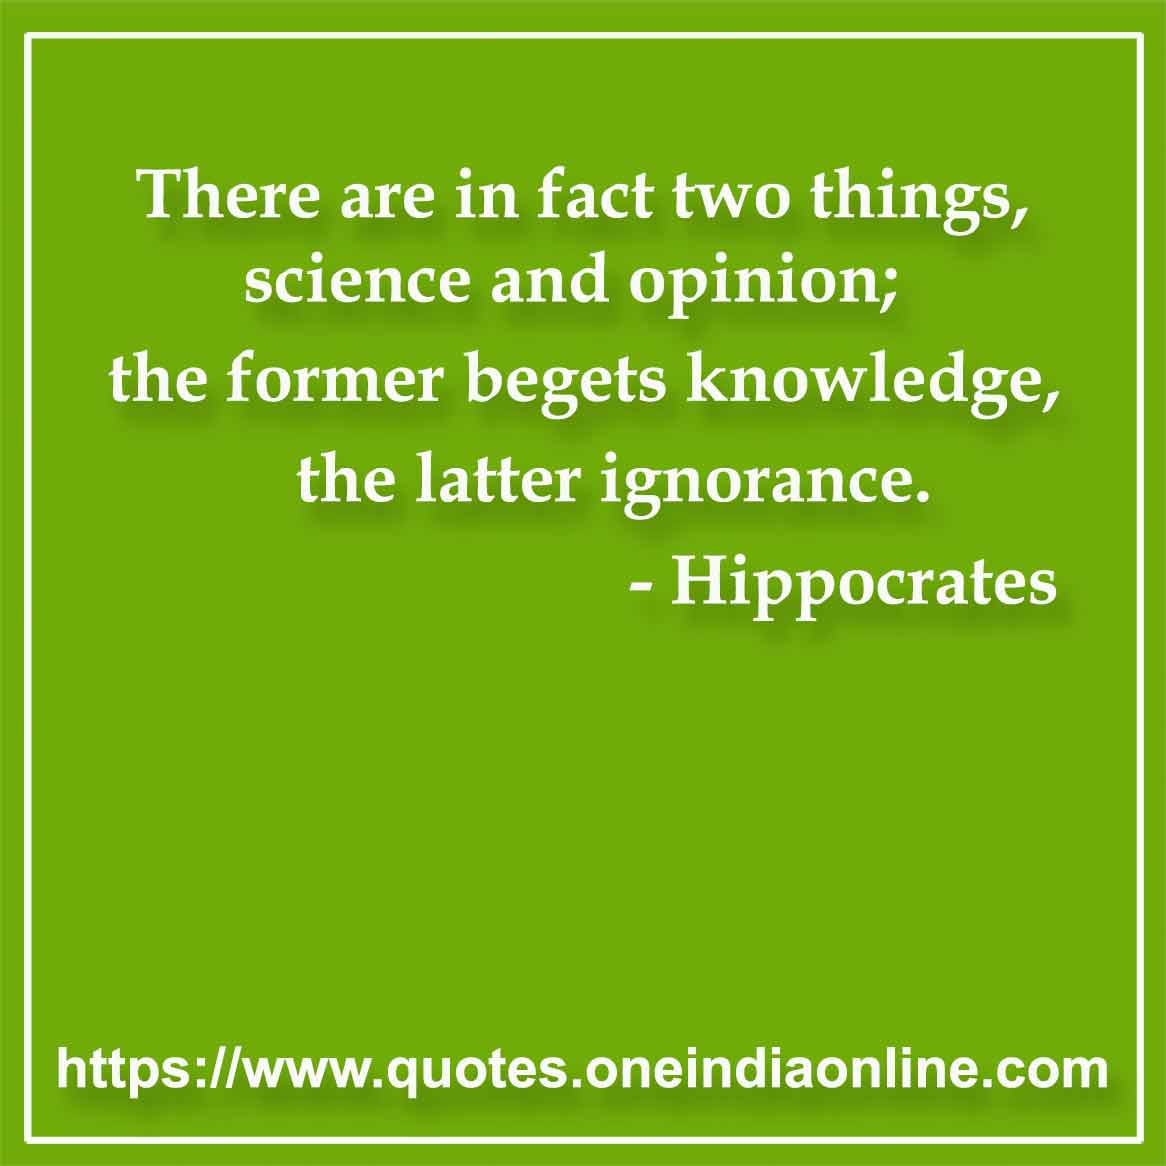 There are in fact two things, science and opinion; the former begets knowledge, the latter ignorance. 

- Science Quotes by Hippocrates 